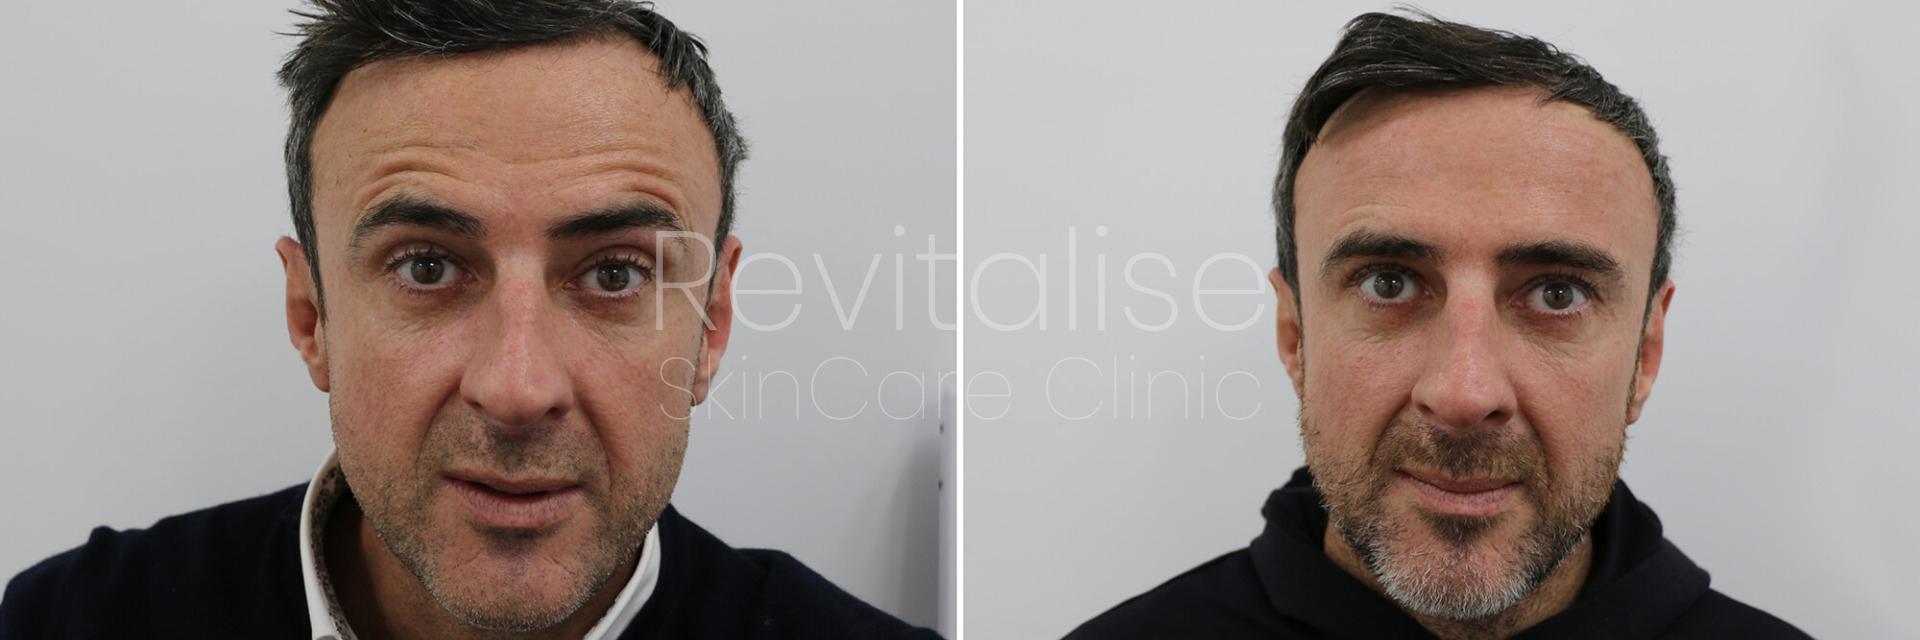 forhead botox treatment of a male before and after